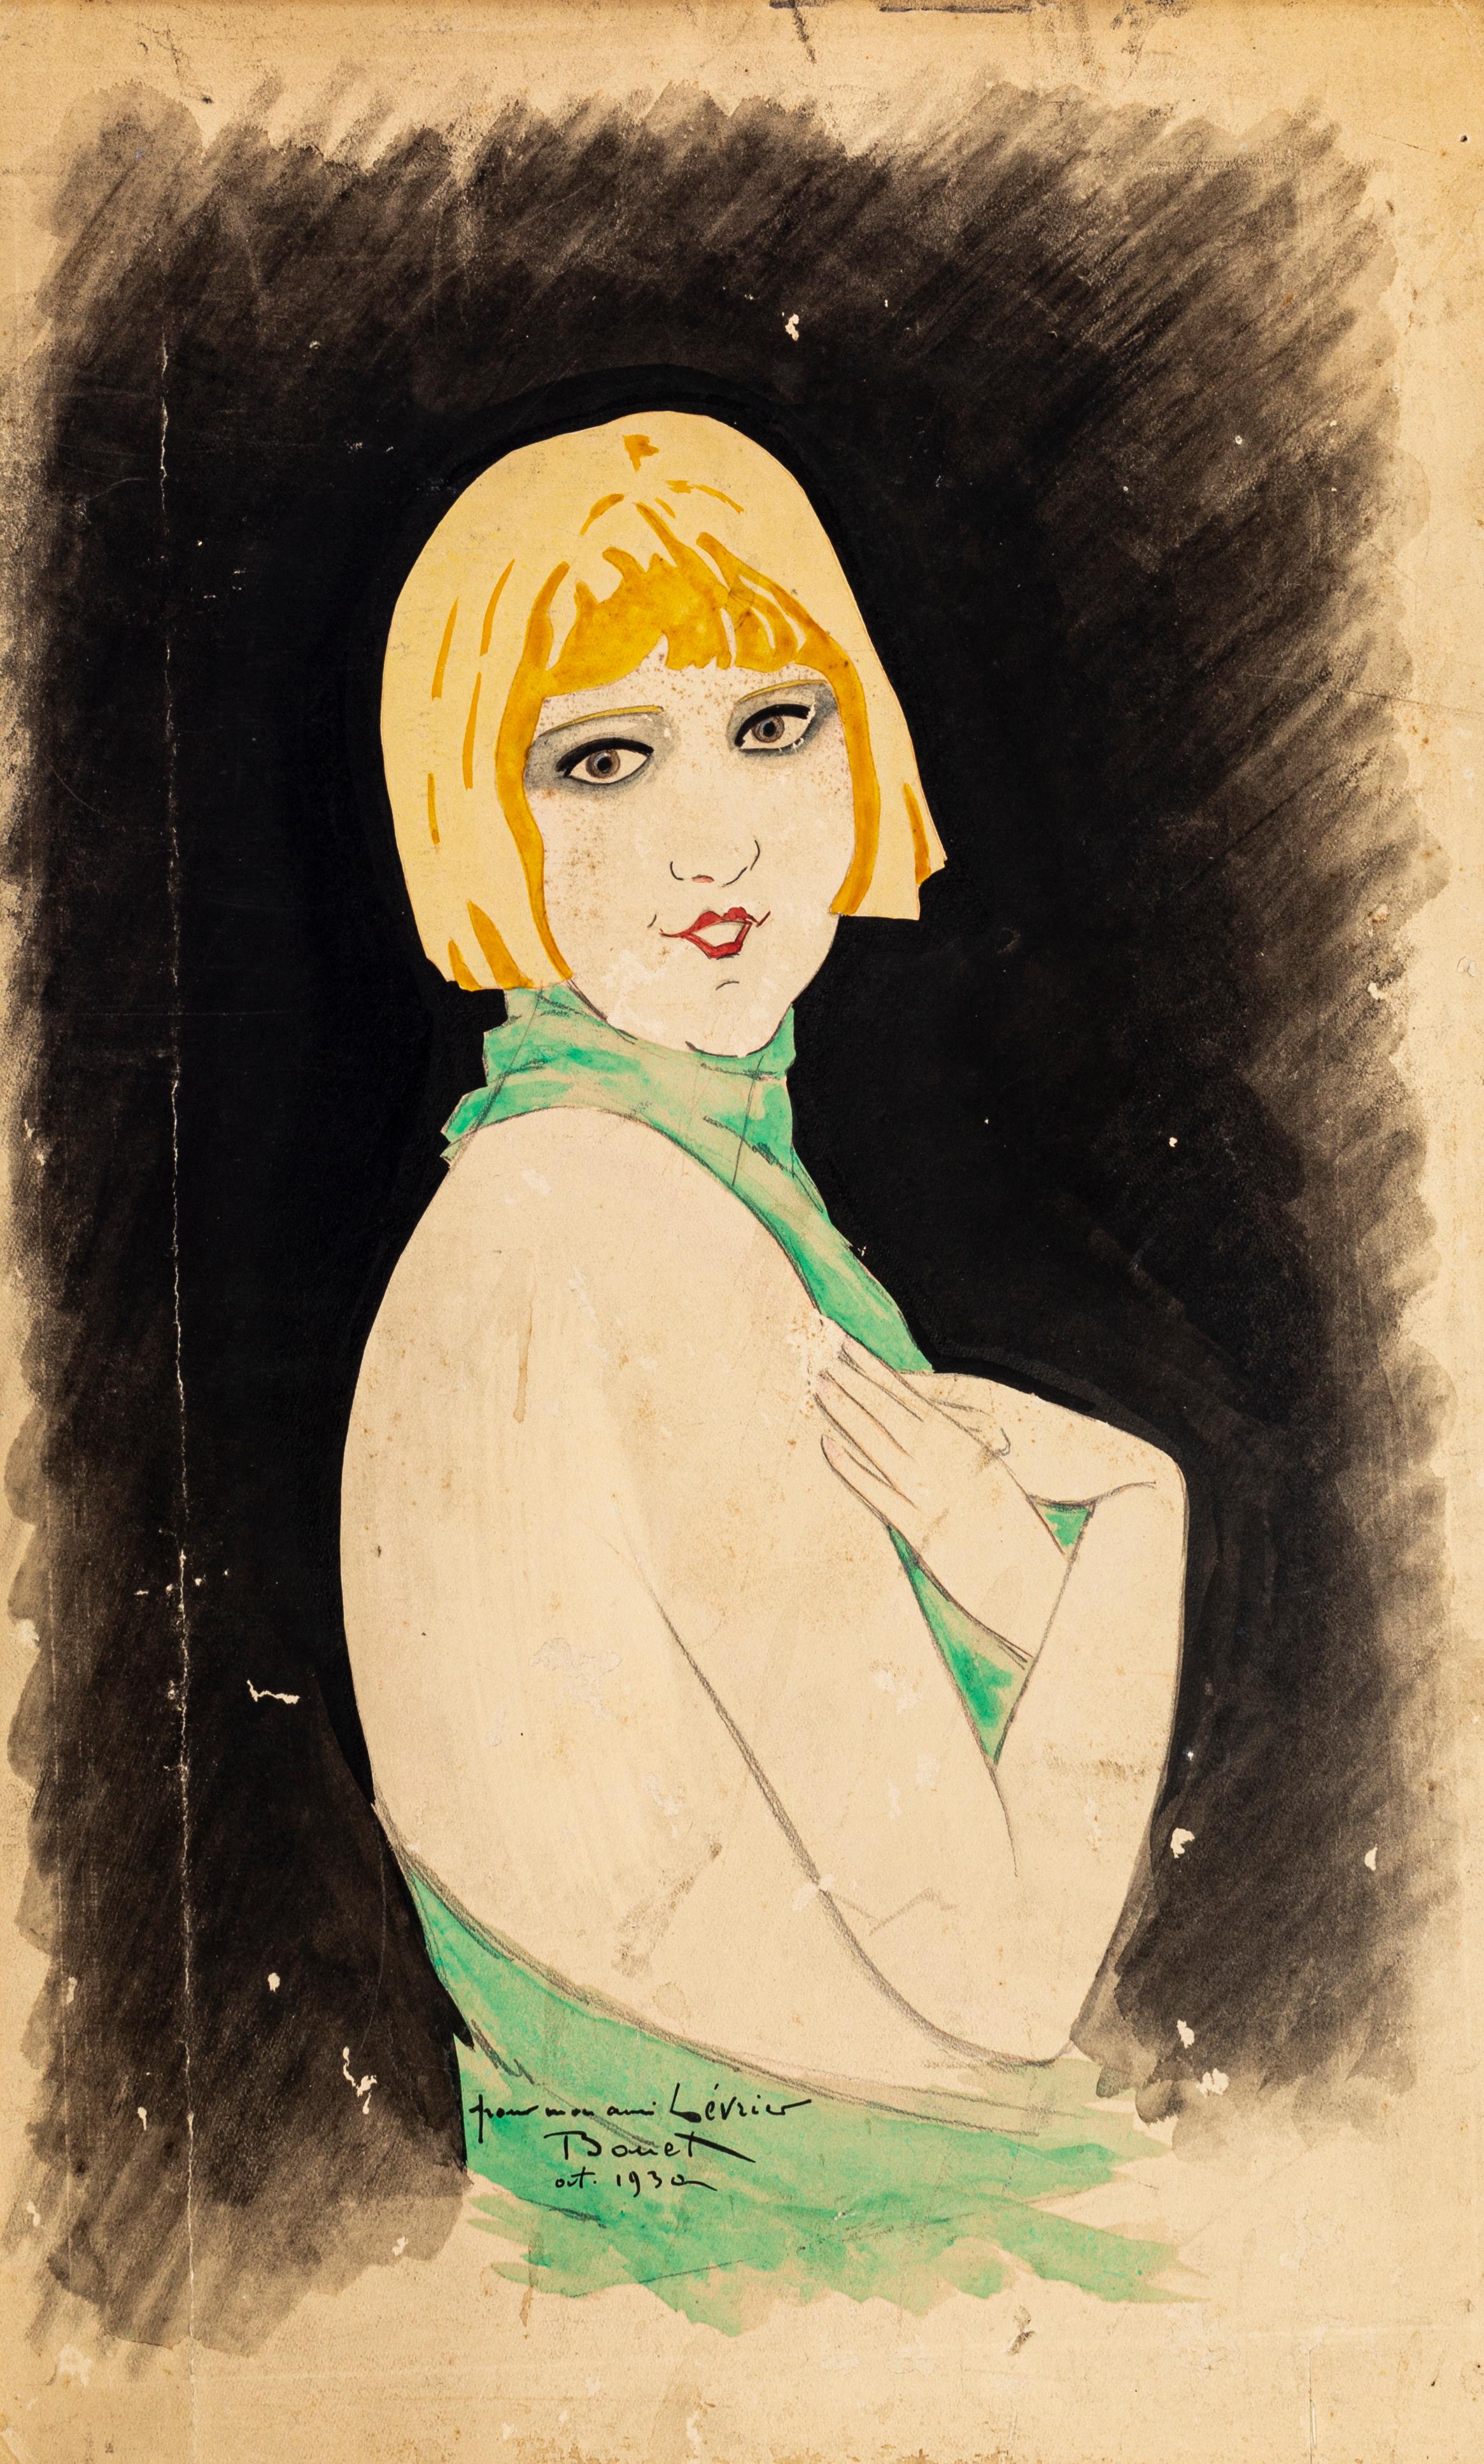 Portrait of Woman - Original Ink and Watercolor Drawing by Paul Bonet - 1930